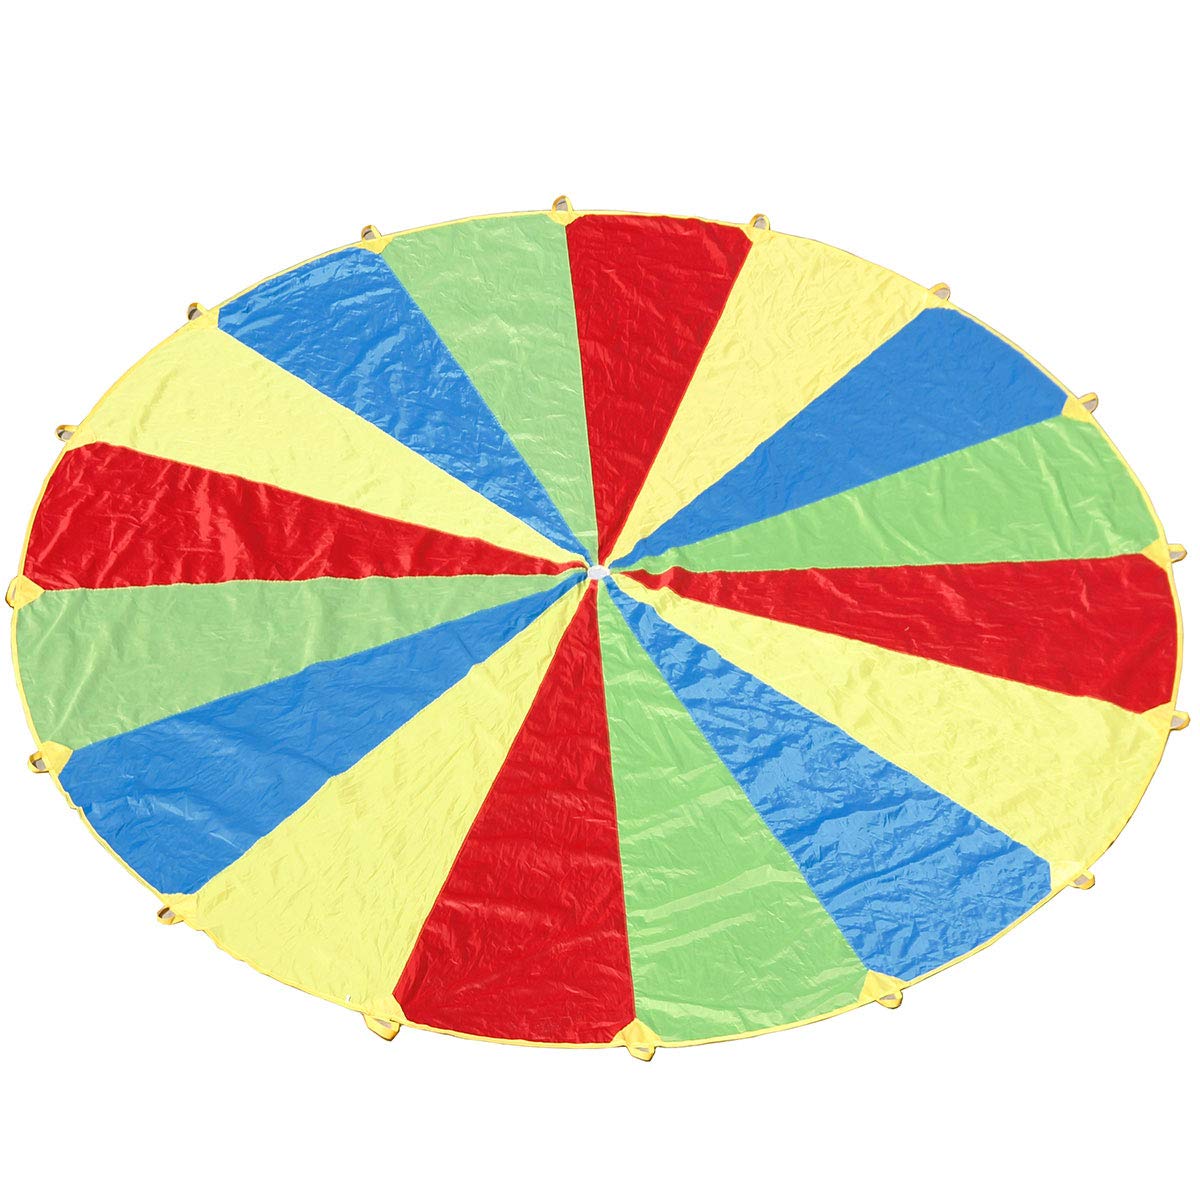 Sonyabecca Parachute, Play Parachute 16ft with 12 Handles 20ft 24ft with 16 Handles for Kids Cooperation Group Play